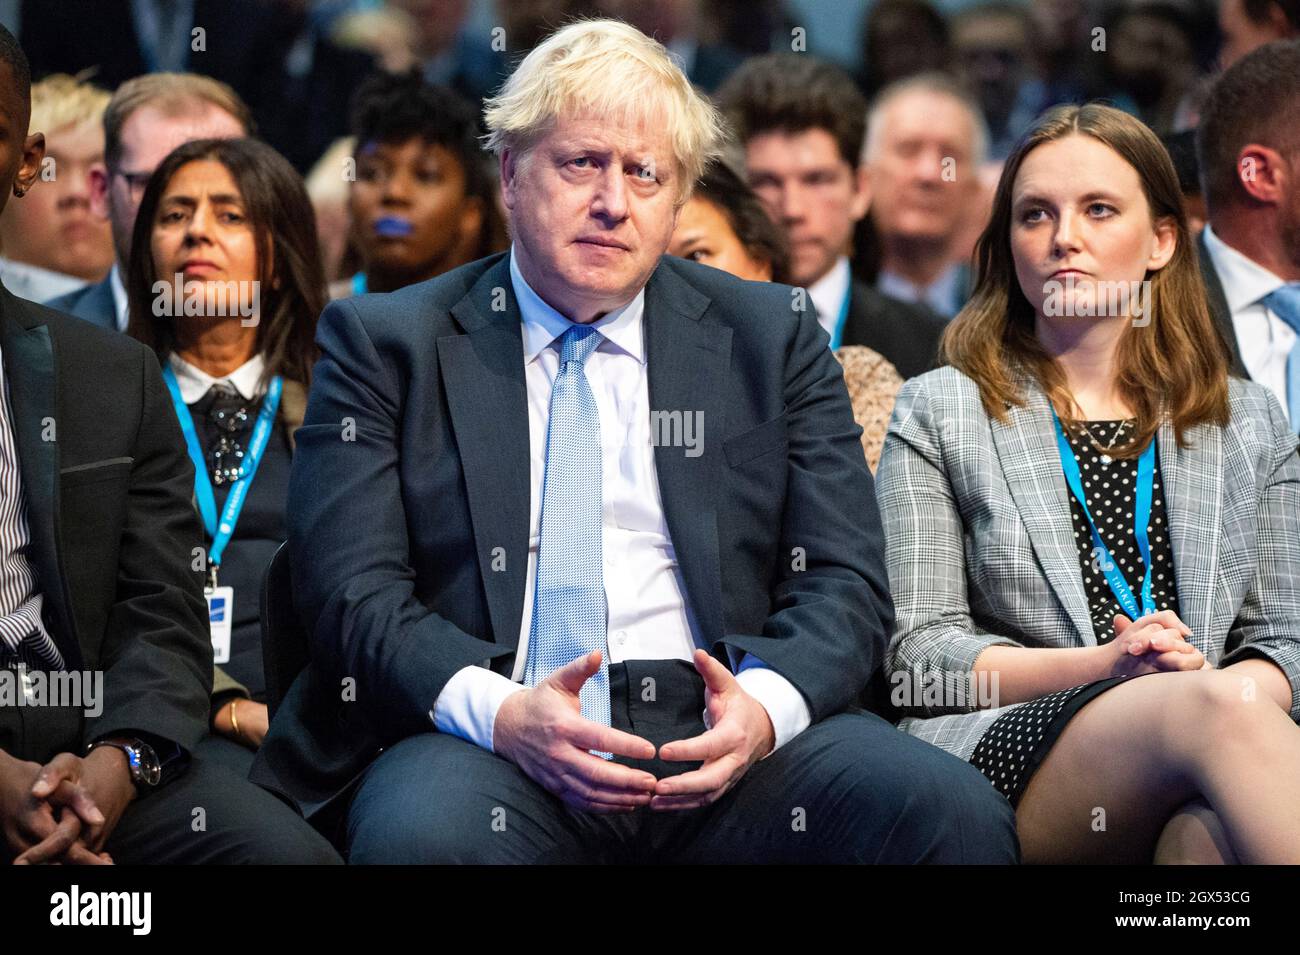 Manchester, England, UK. 4th Oct, 2021. PICTURED: Rt Hon Boris Johnson MP, UK Prime Minister, at the Conservative party Conference #CPC21. Credit: Colin Fisher/Alamy Live News Stock Photo